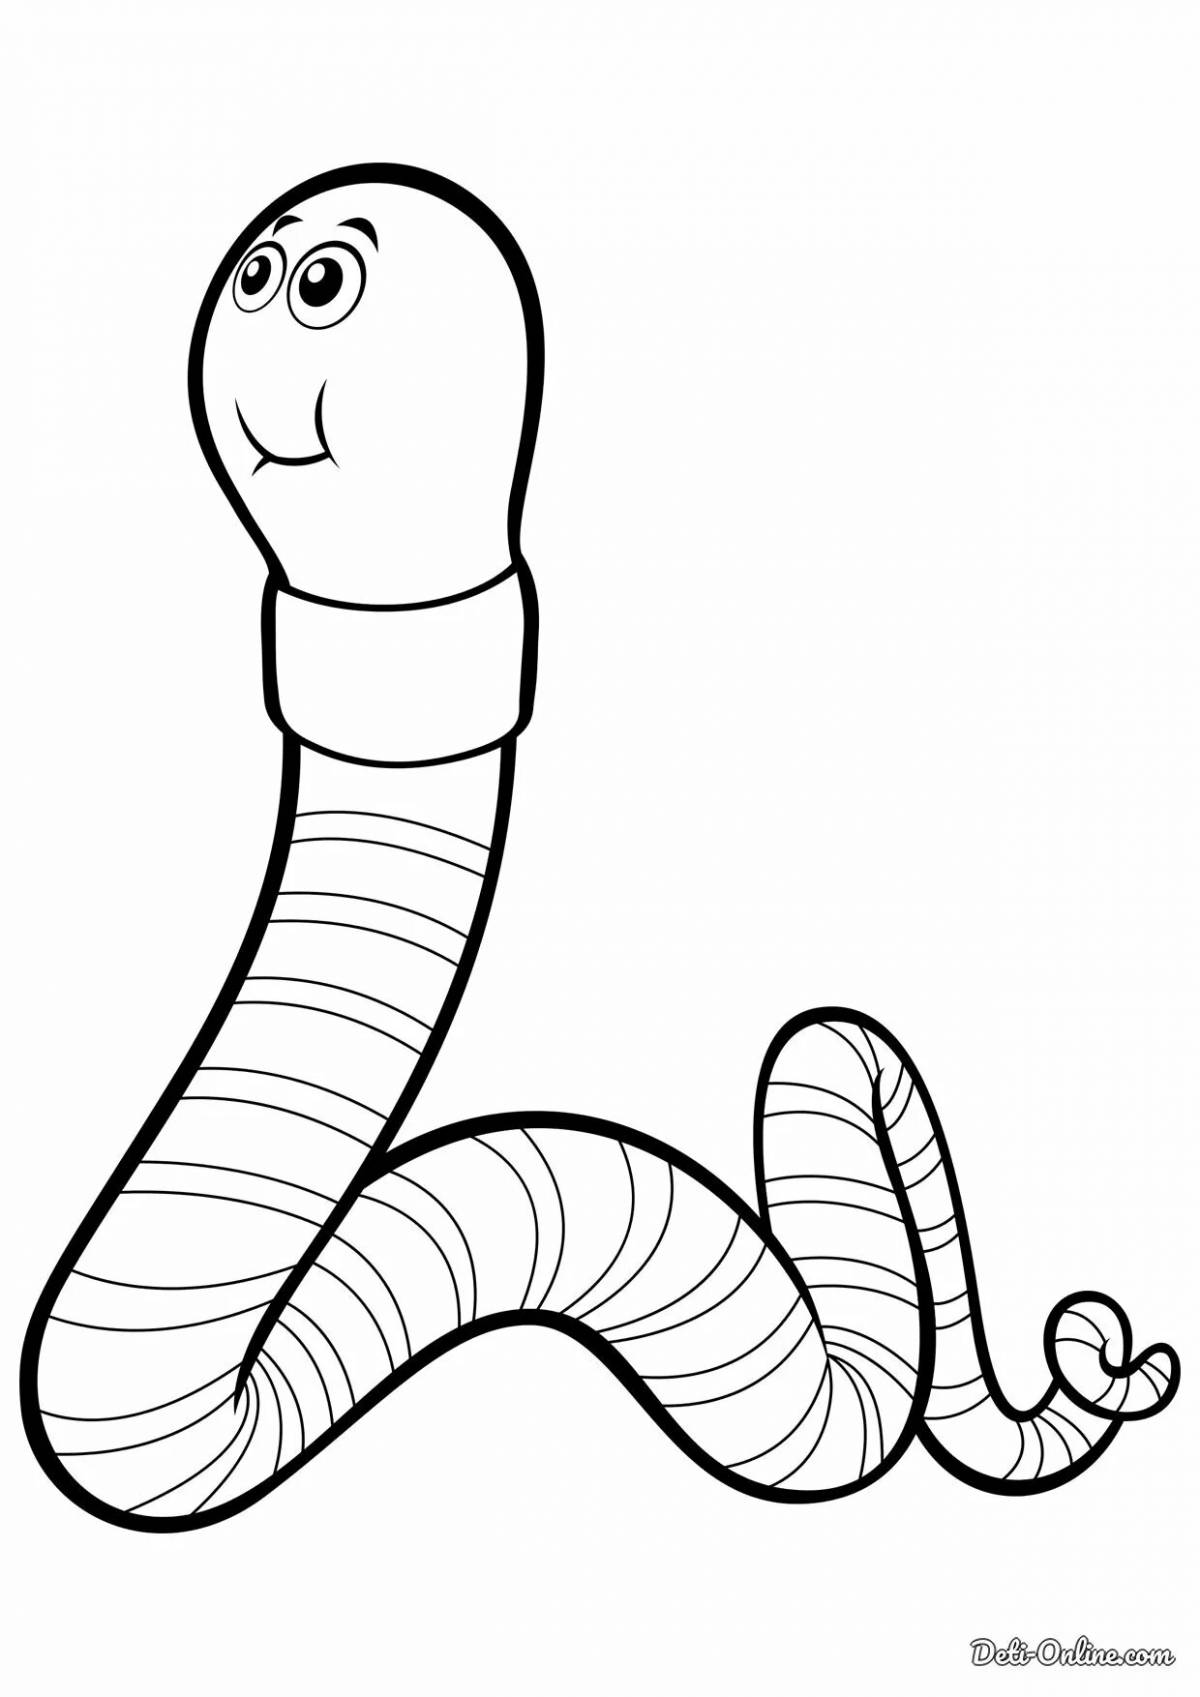 Worm for kids #14